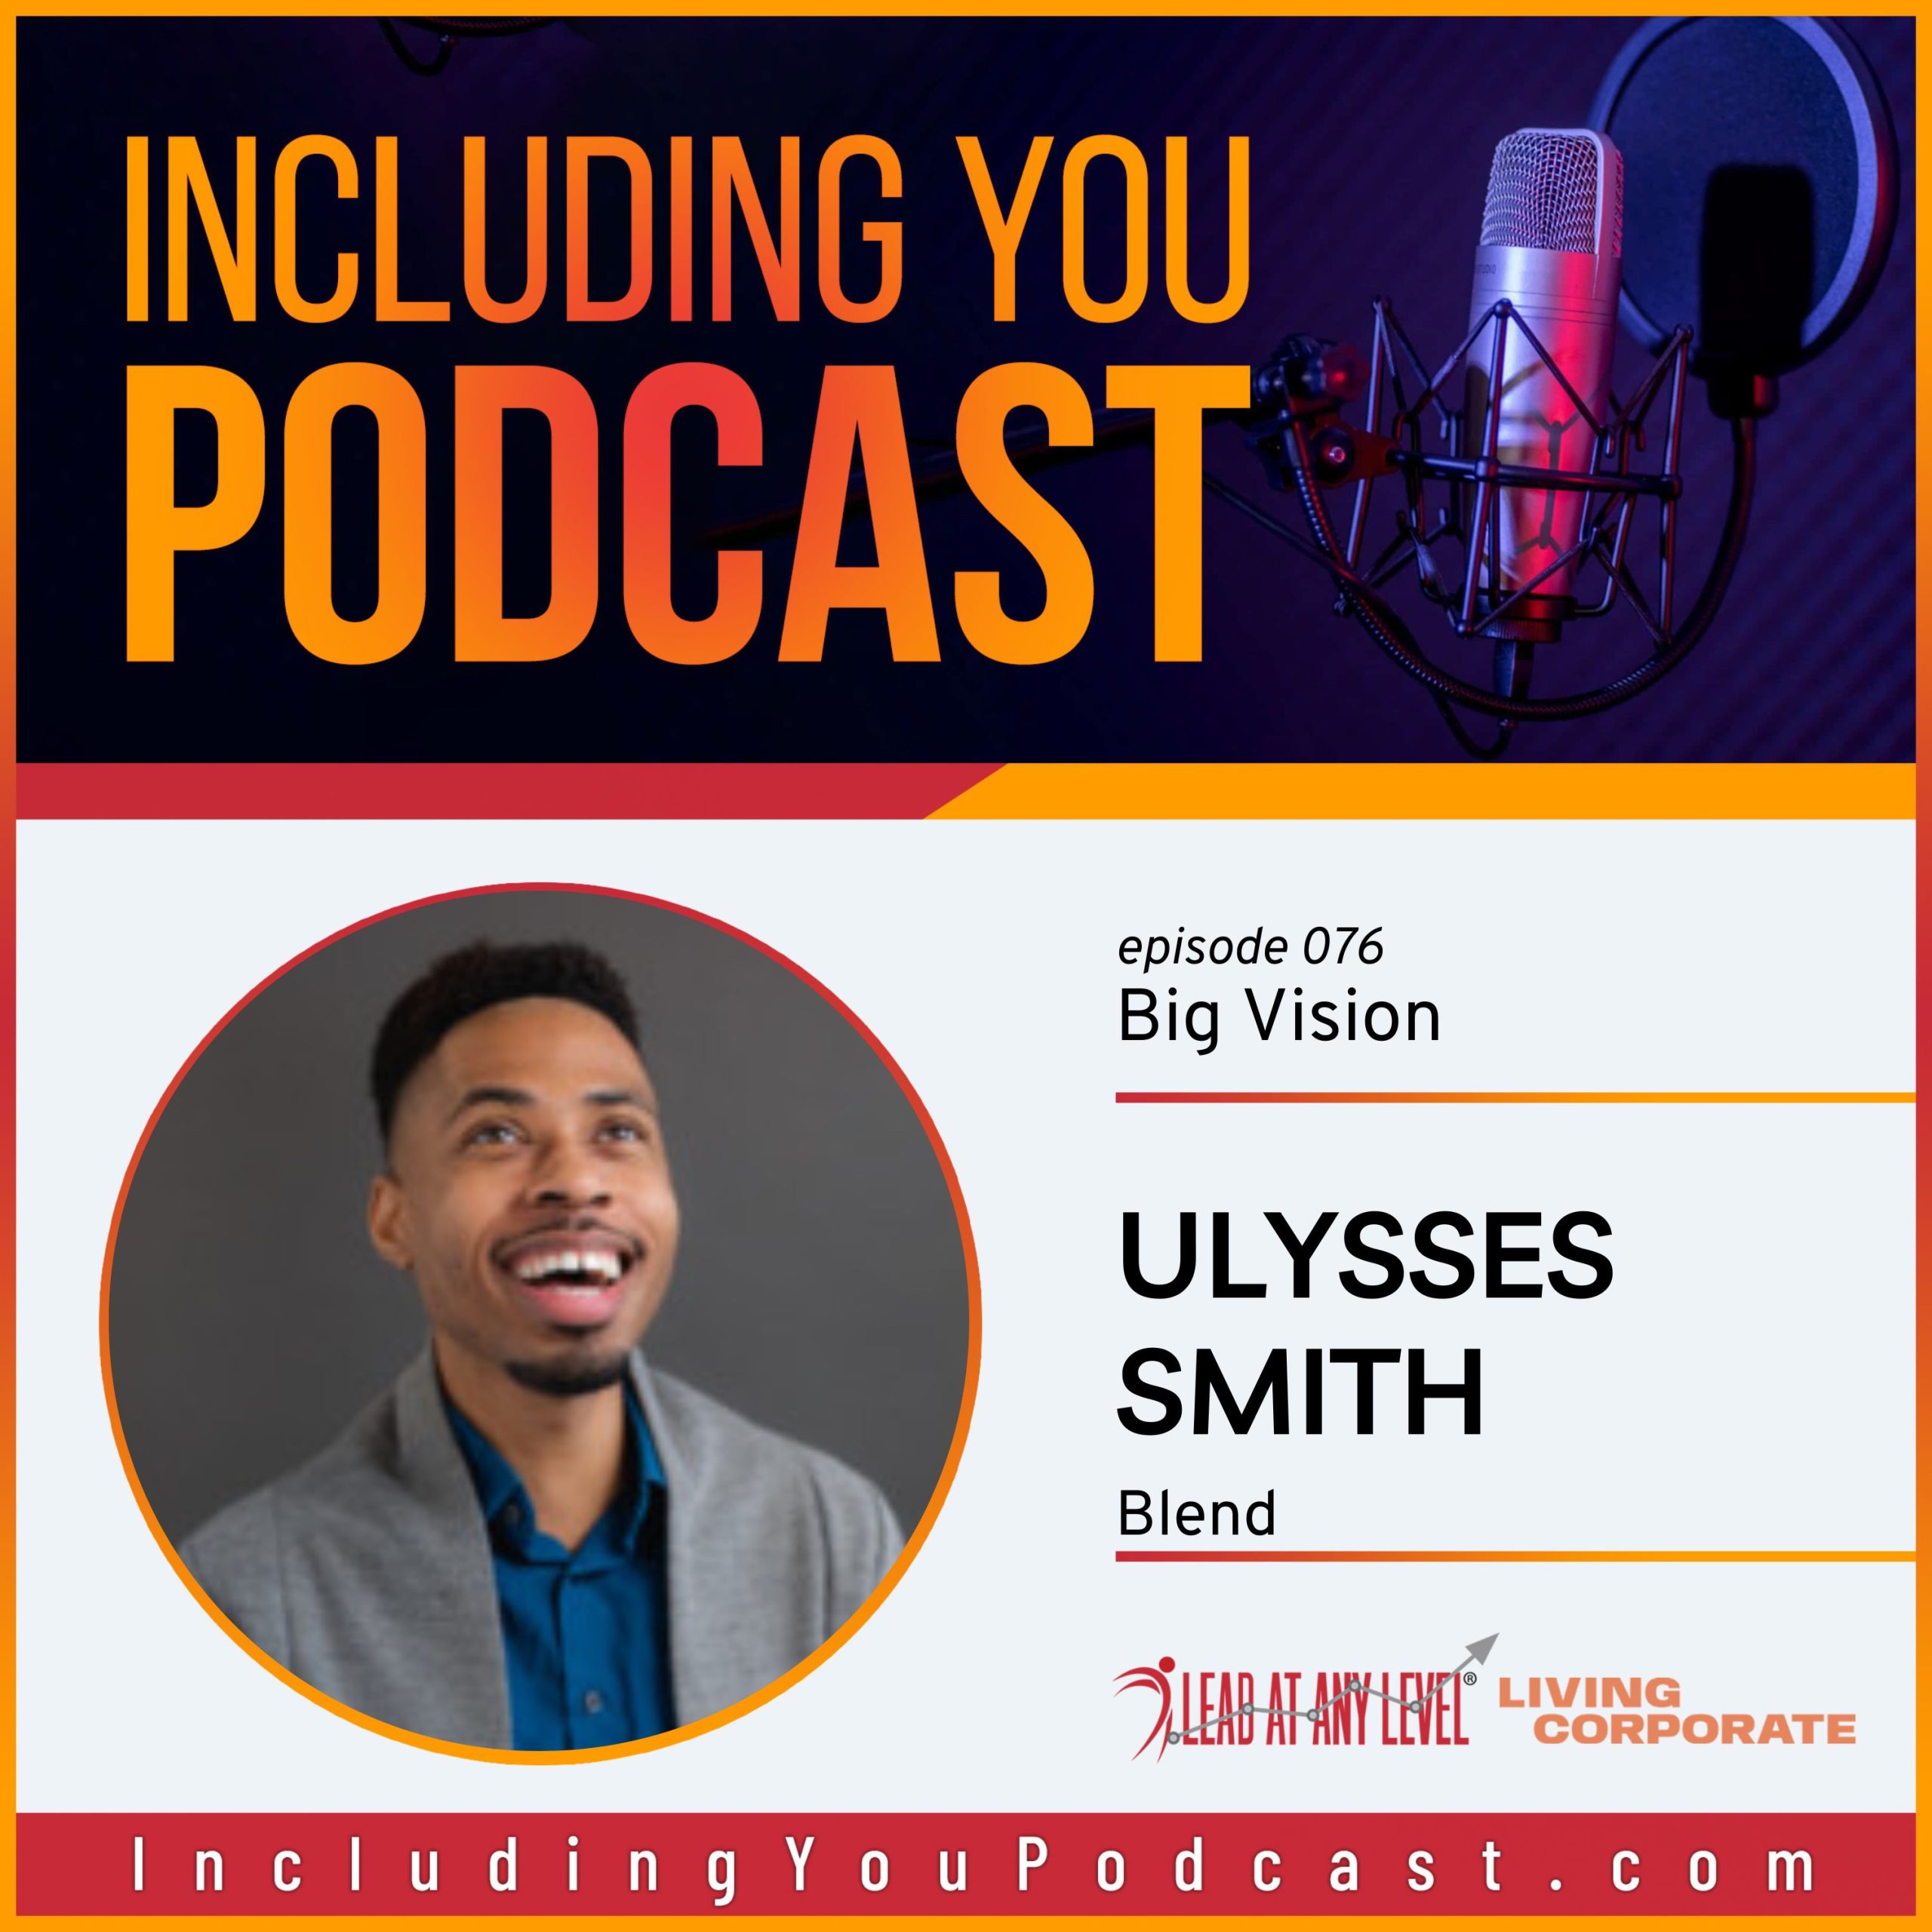 e076. Big Vision with Ulysses Smith